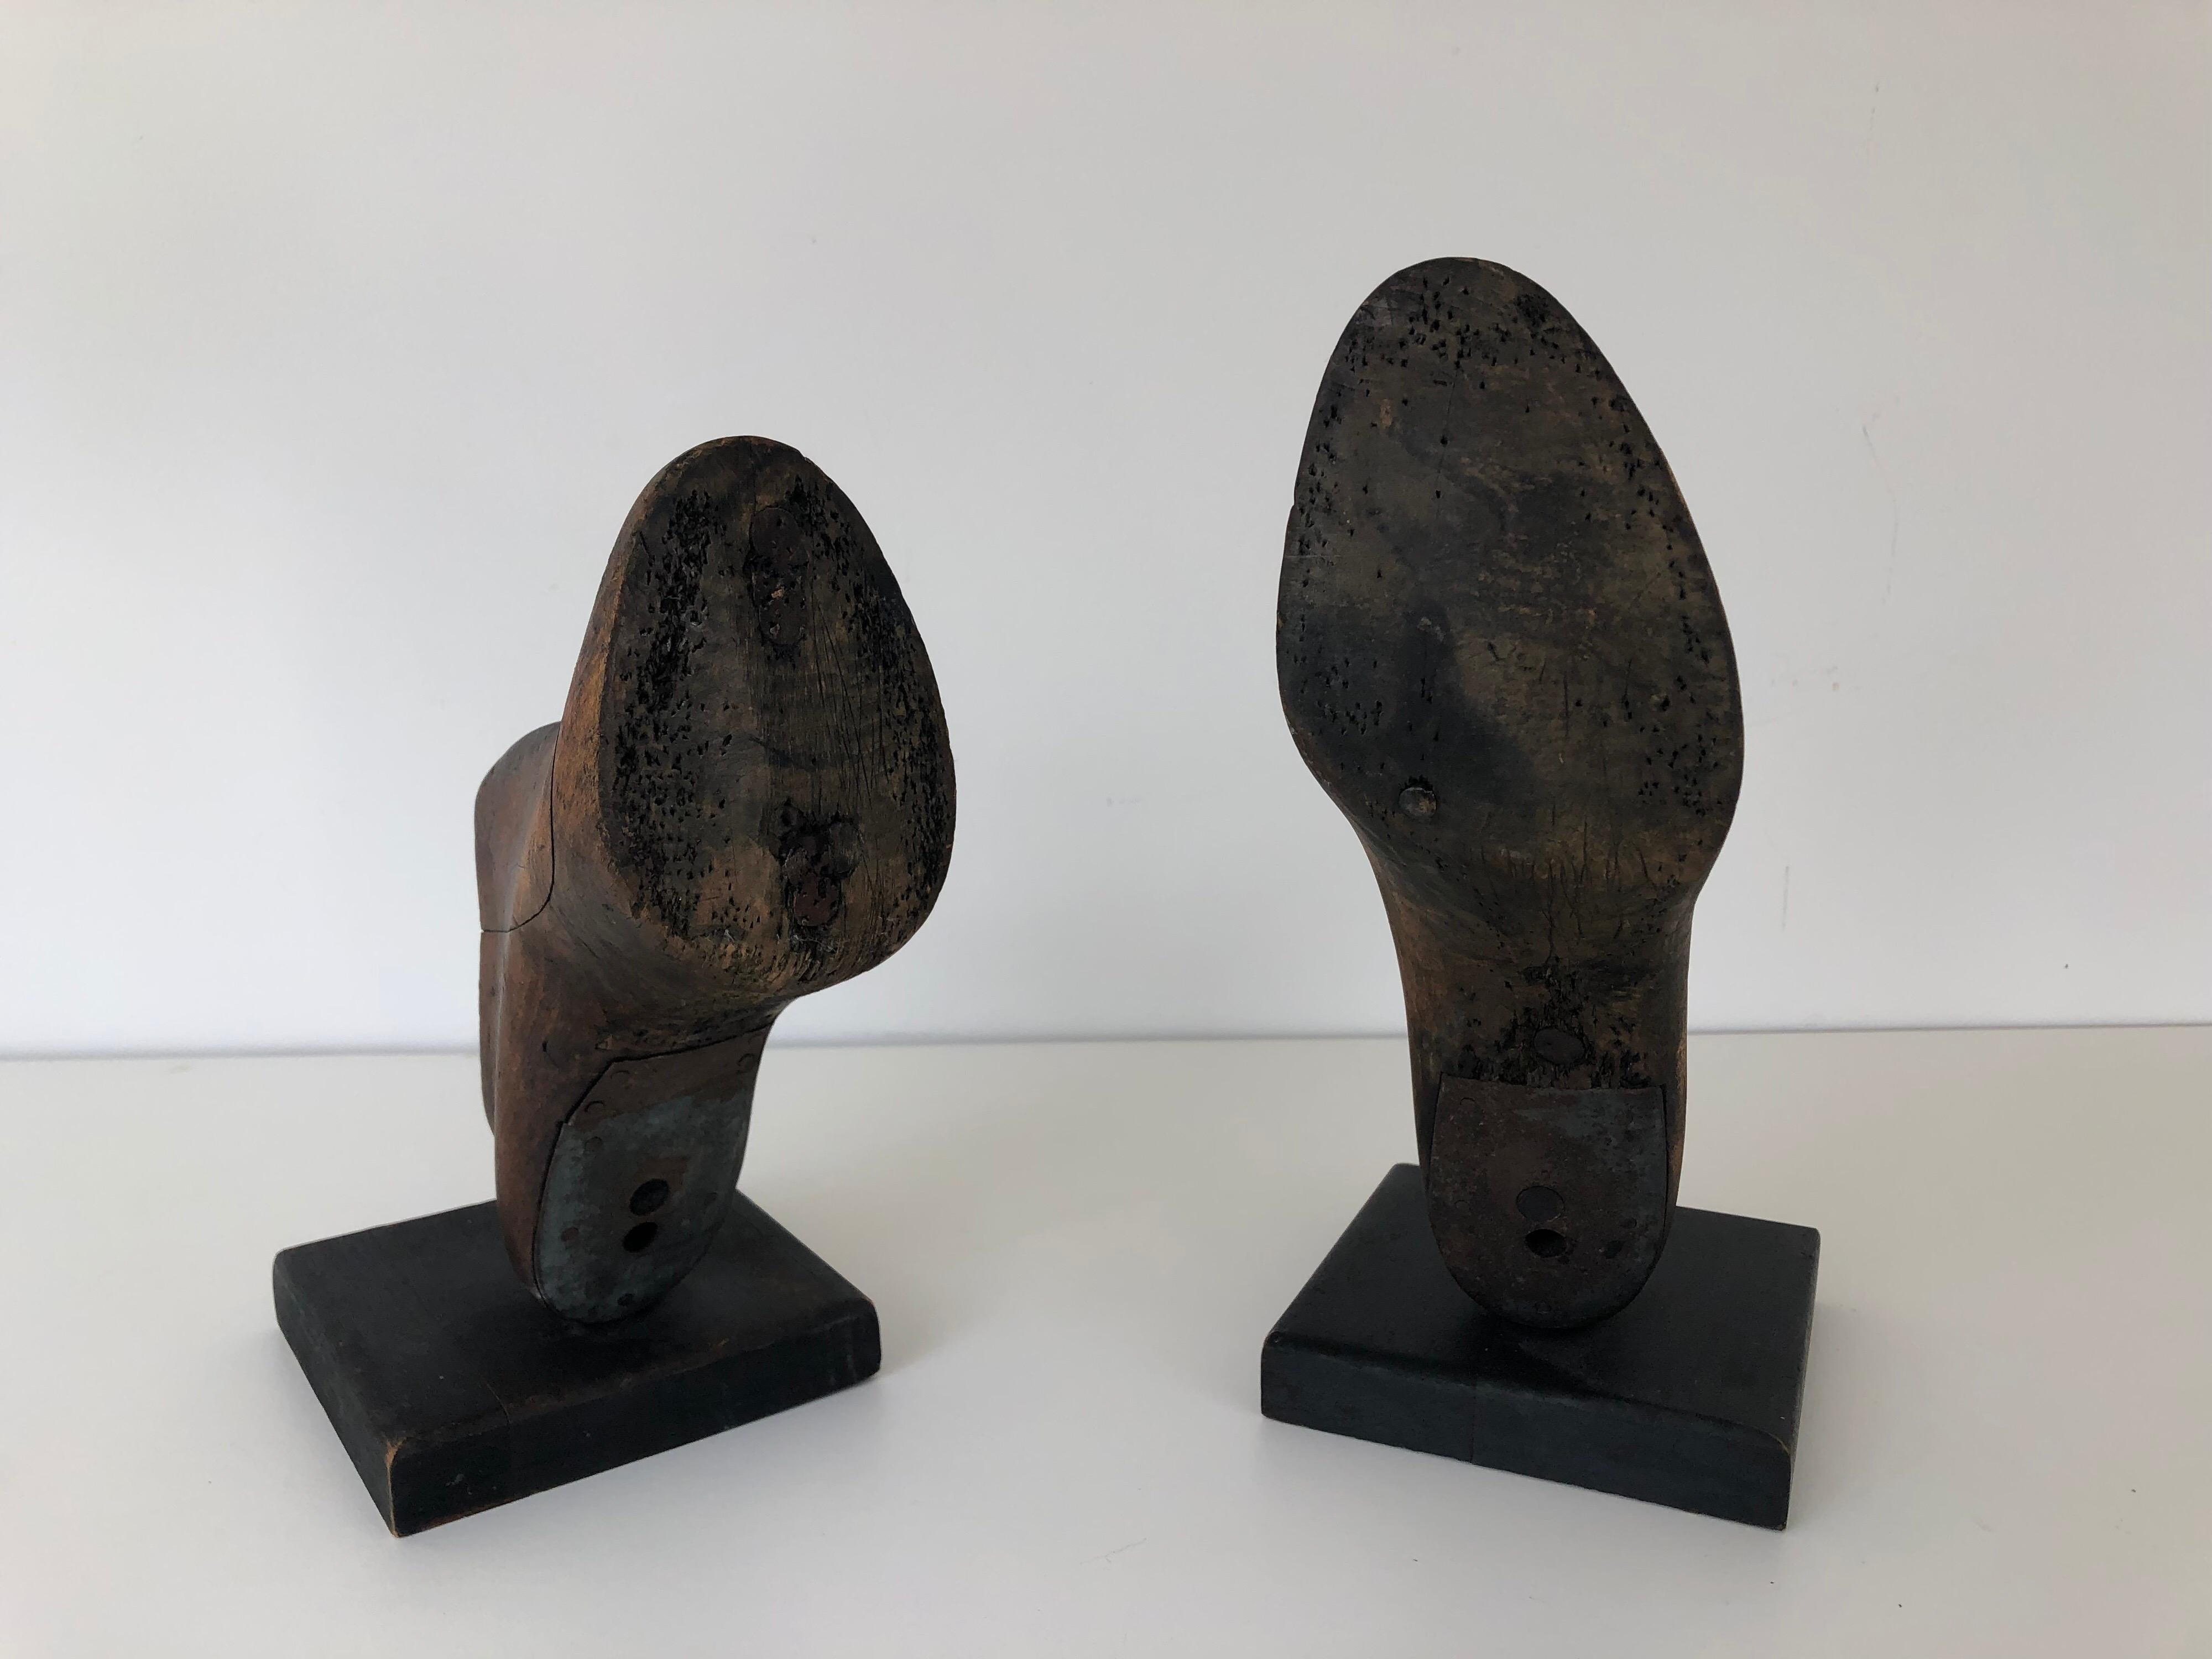 Pair of Vintage Wood Shoe Mold Bookends In Excellent Condition For Sale In Stockton, NJ